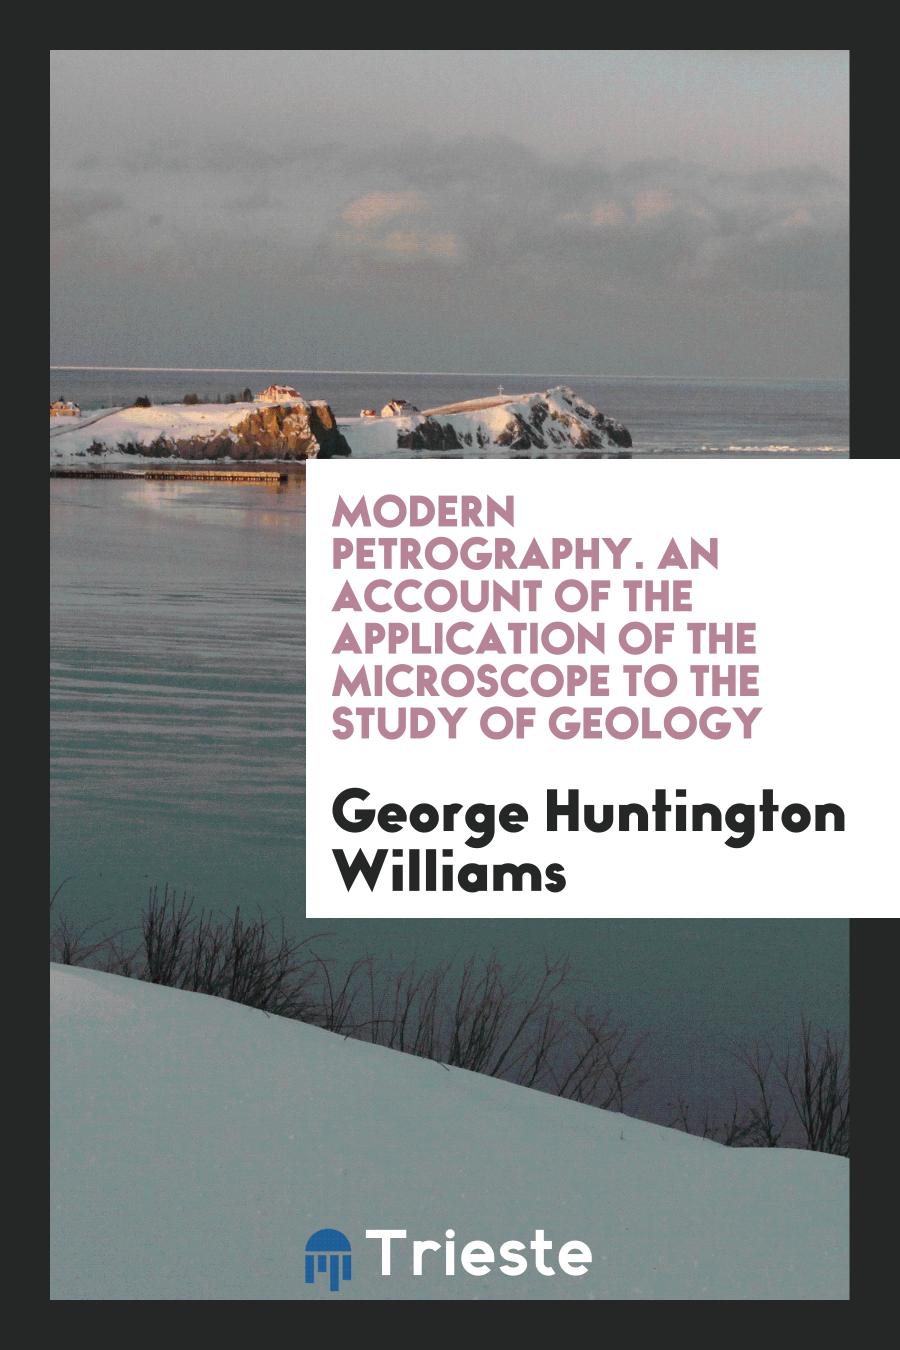 Modern petrography. An account of the application of the microscope to the study of geology